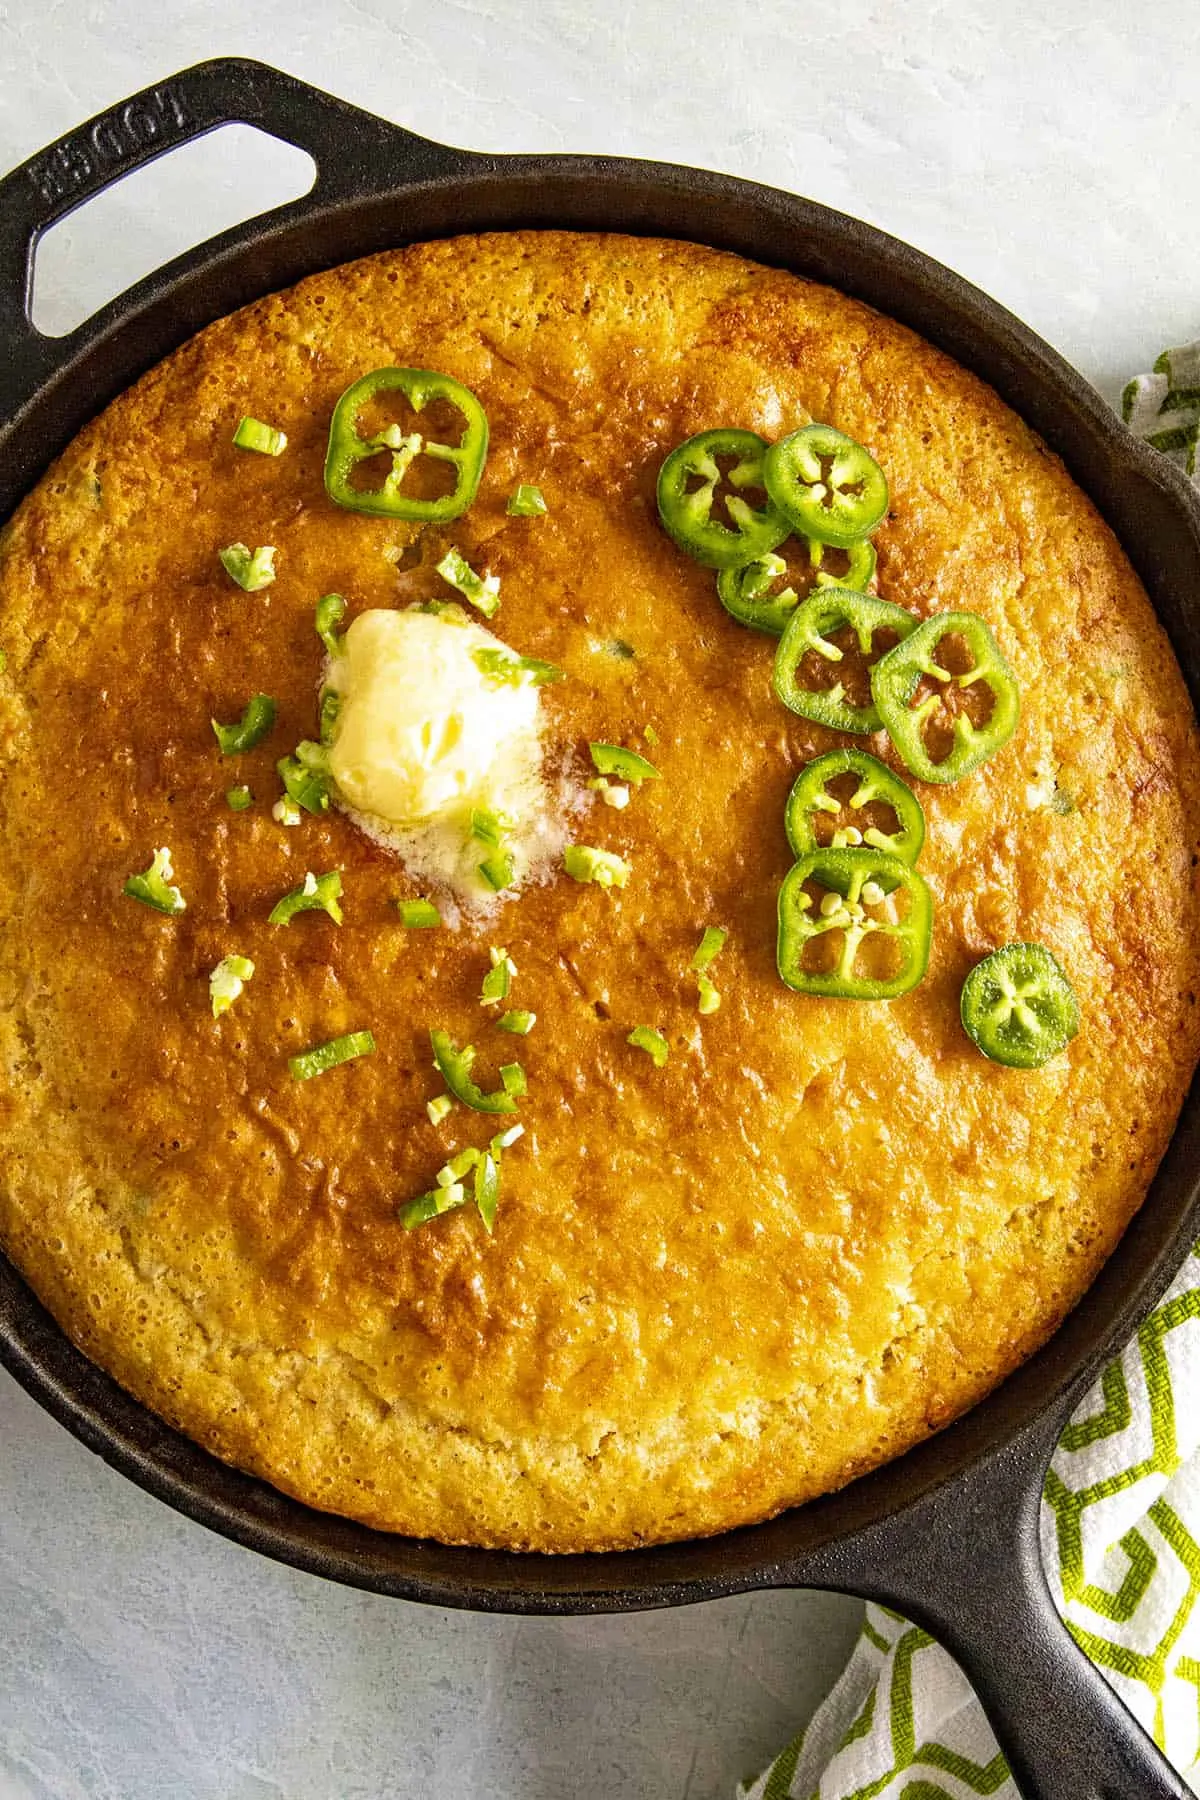 Skillet Cornbread with hot butter and extra jalapeno slices